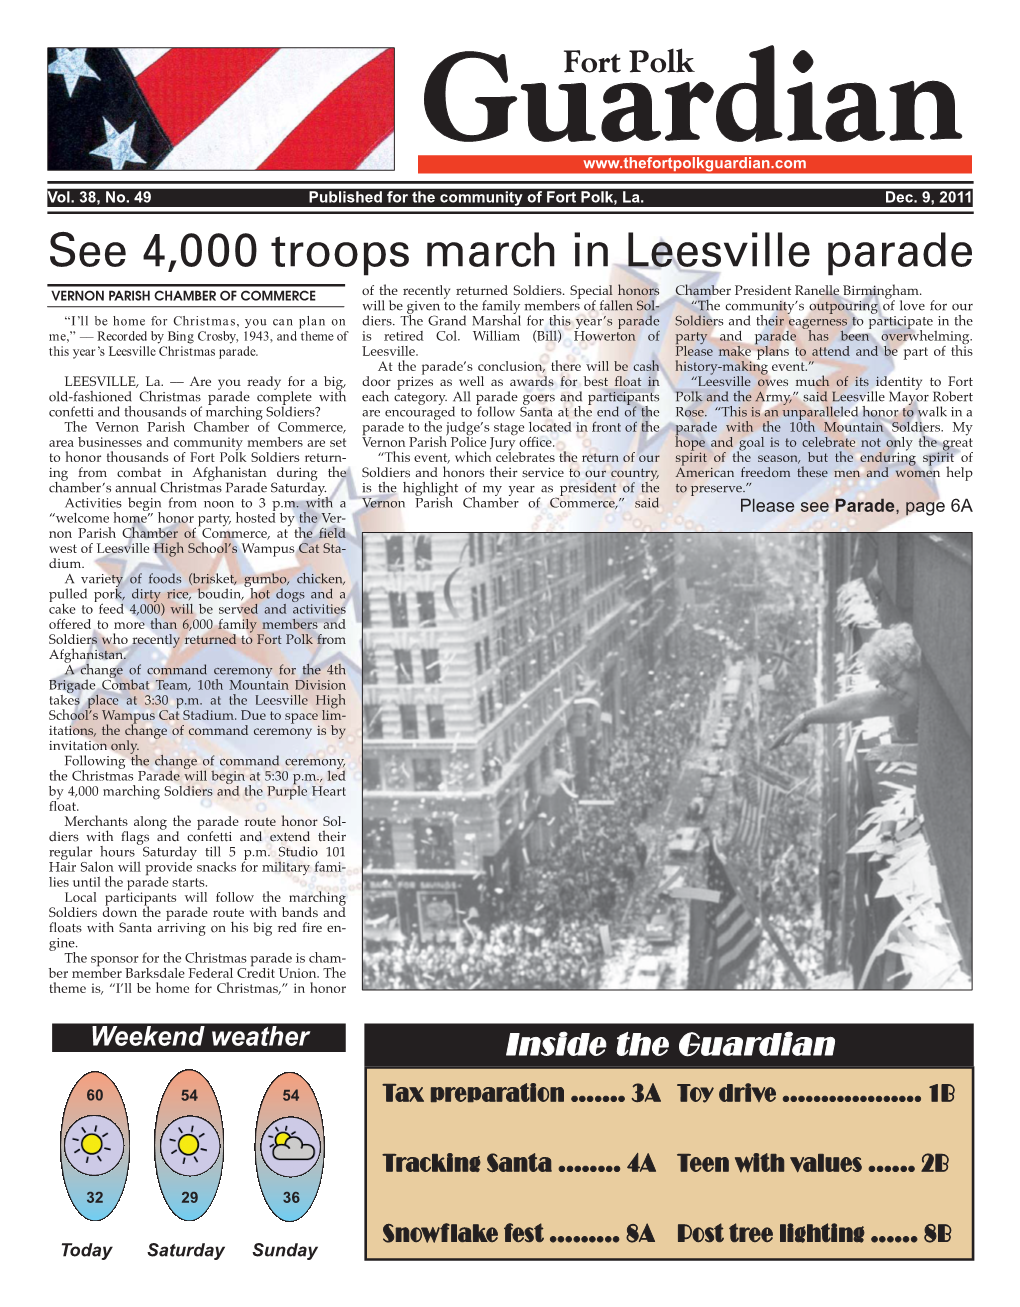 See 4,000 Troops March in Leesville Parade